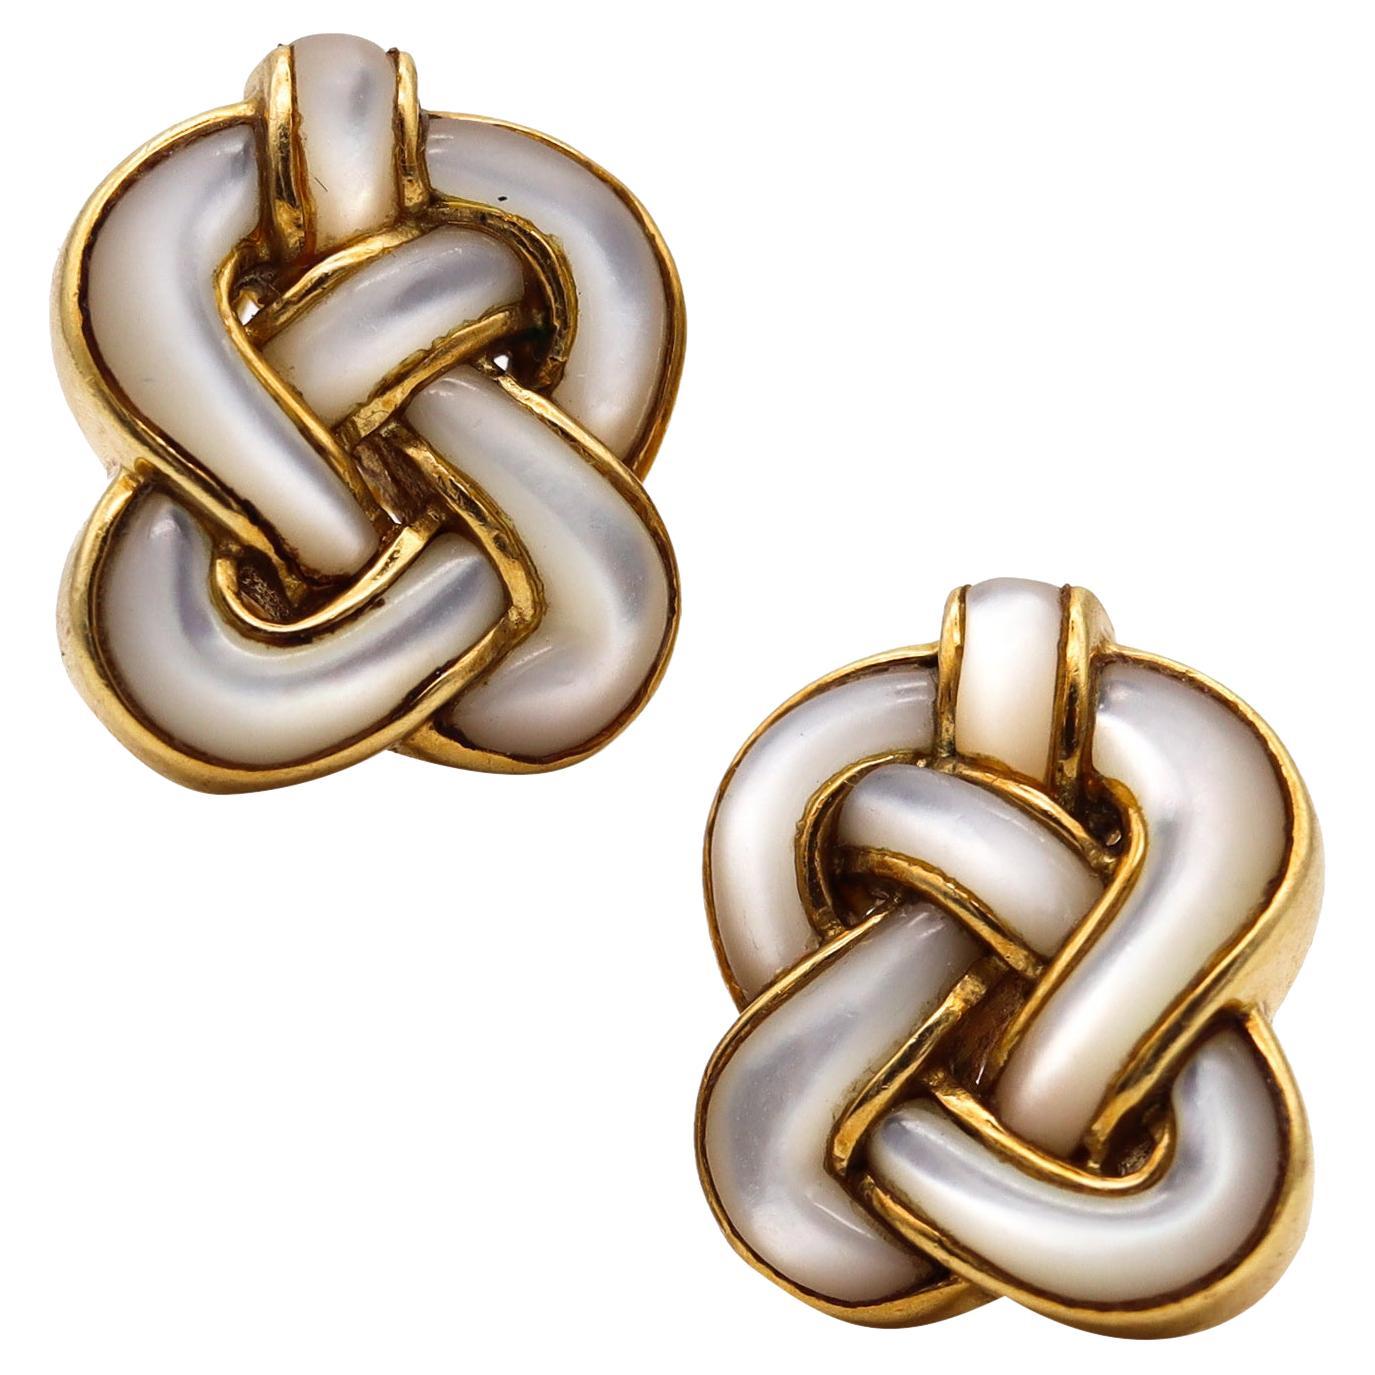 Angela Cummings New York Knots Earrings in 18Kt Yellow Gold with White Nacre